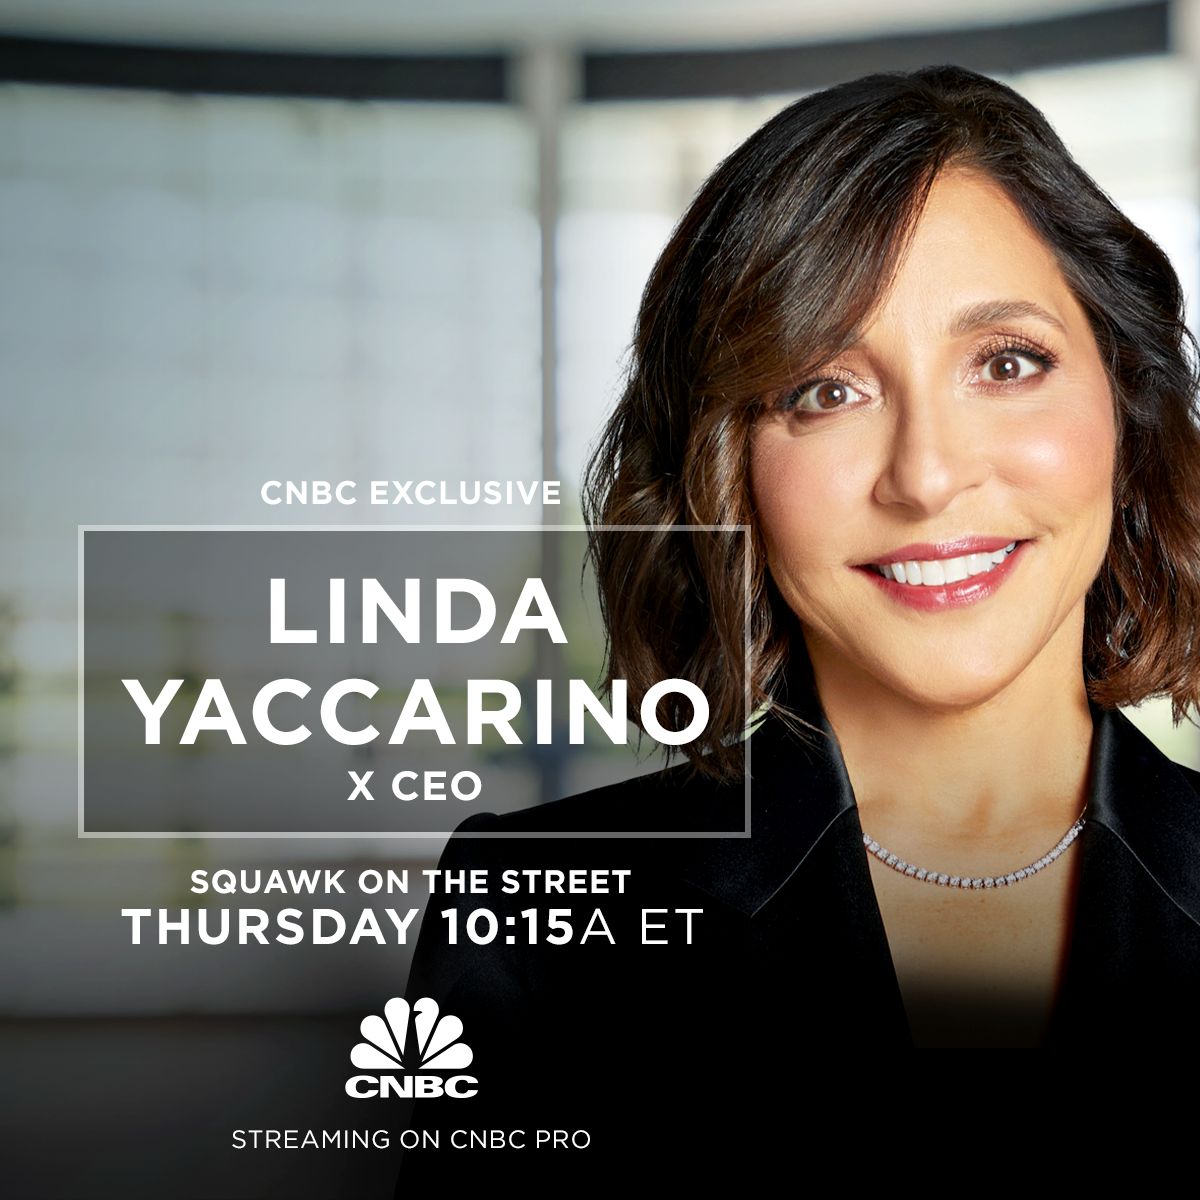 In her first interview as X CEO, Linda Yaccarino speaks with CNBC’s Sara Eisen about rebranding Twitter, advertising and the future of the platform.